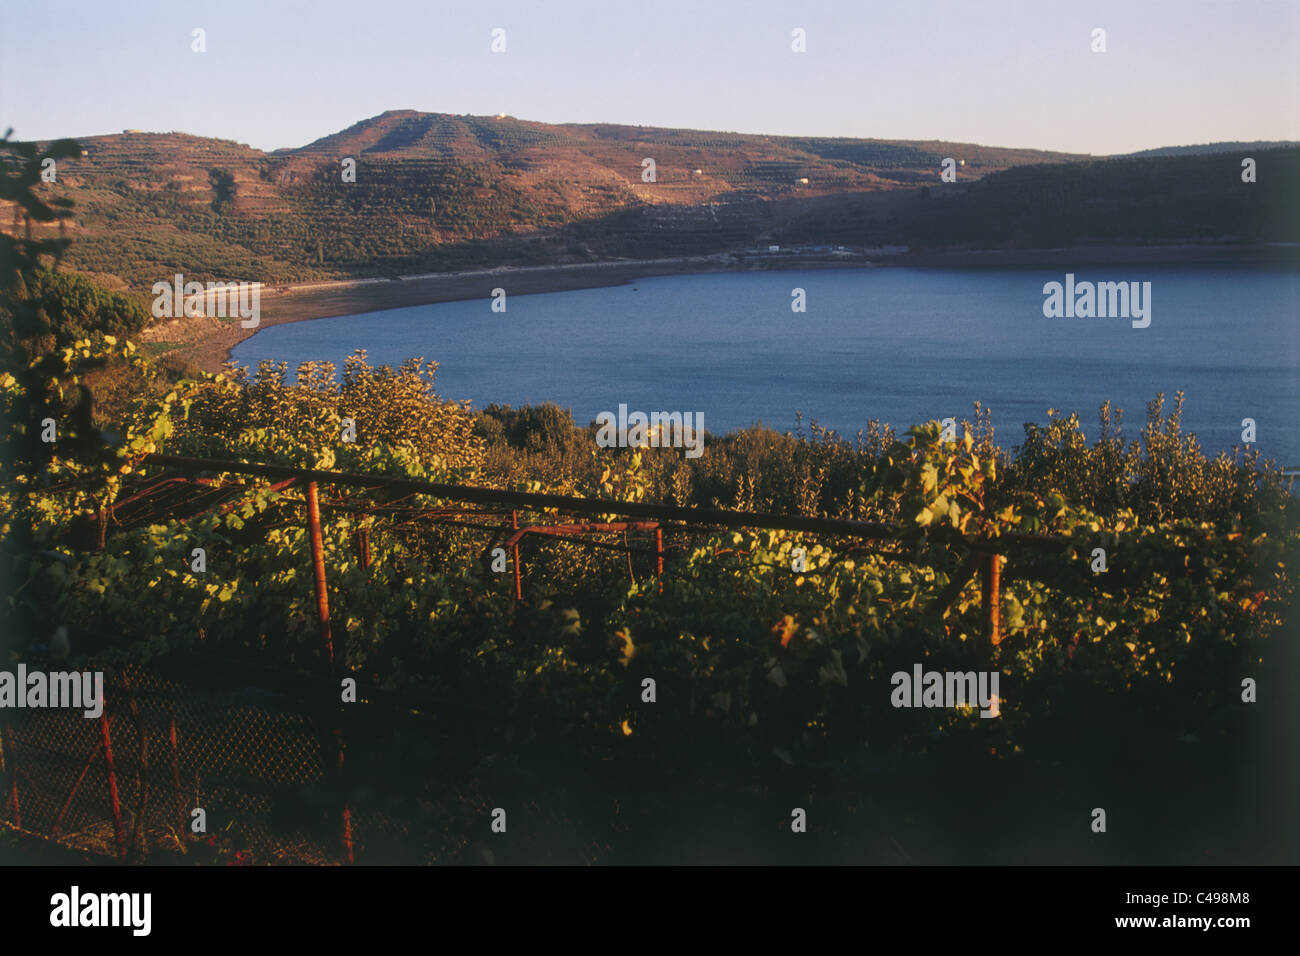 Photograph of Ram's pool in the northern Golan Heights Stock Photo